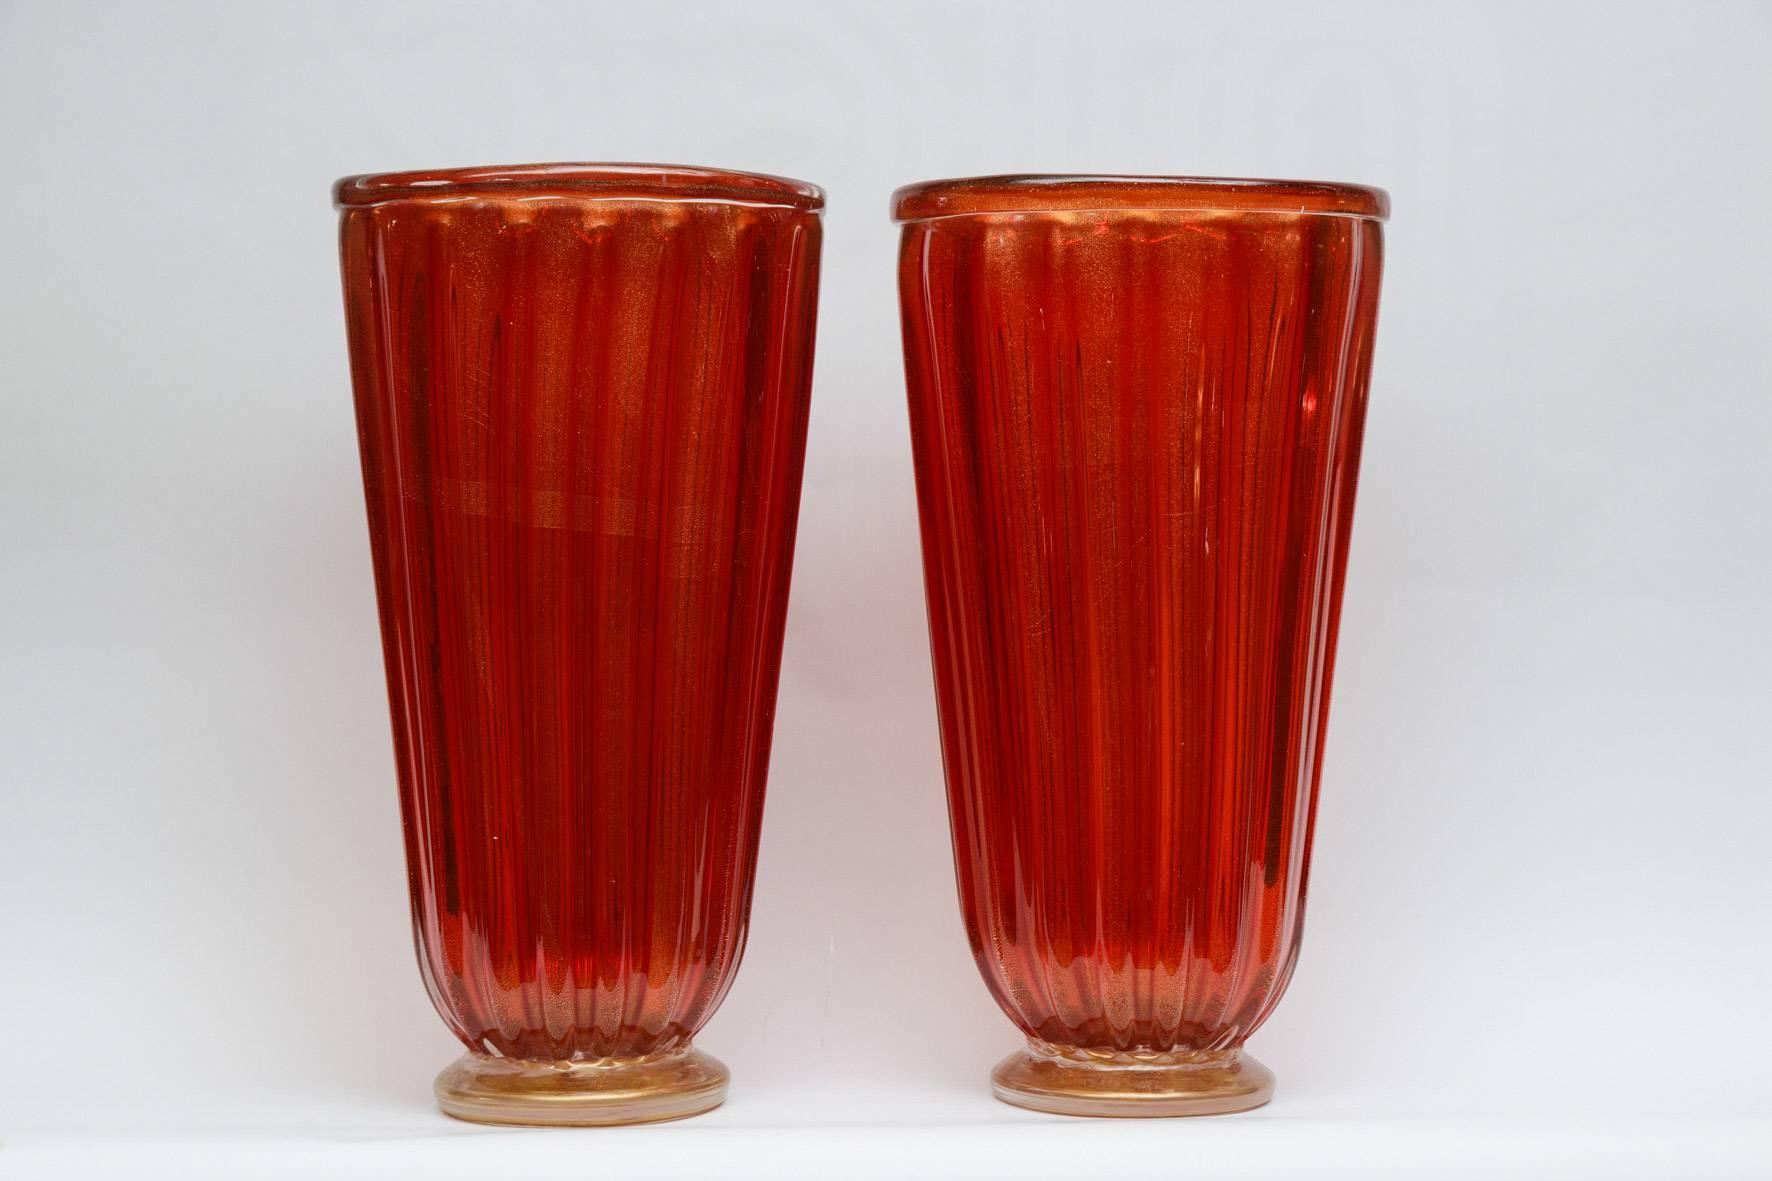 Pair of vases in red and gold Murano glass signed by Toso.